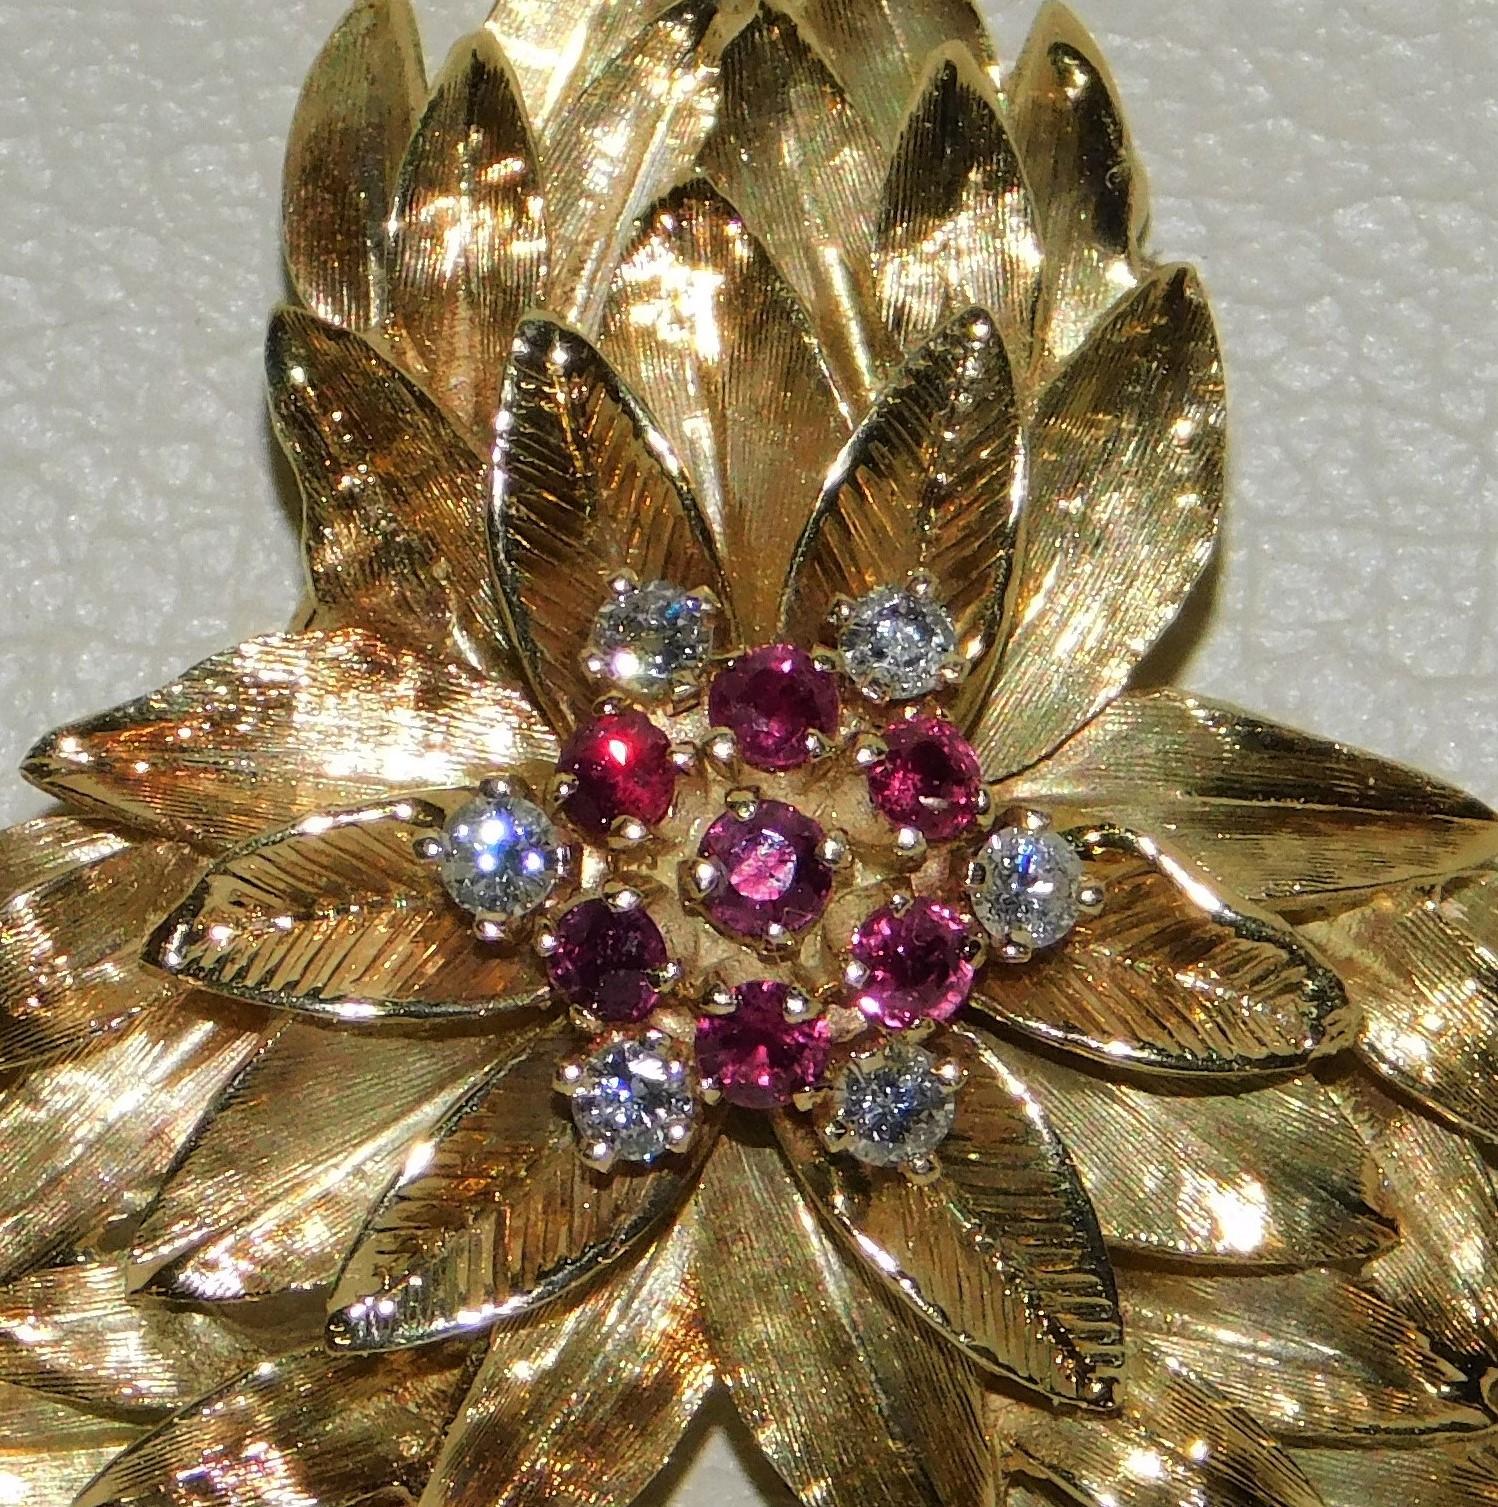 Stamped 14KT yellow gold ladies hand assembled brooch with a bright polish and textured finish in very good condition with a leafy floral design.  Centre of the brooch is set with round brilliant cut rubies and diamonds.  Brooch measures